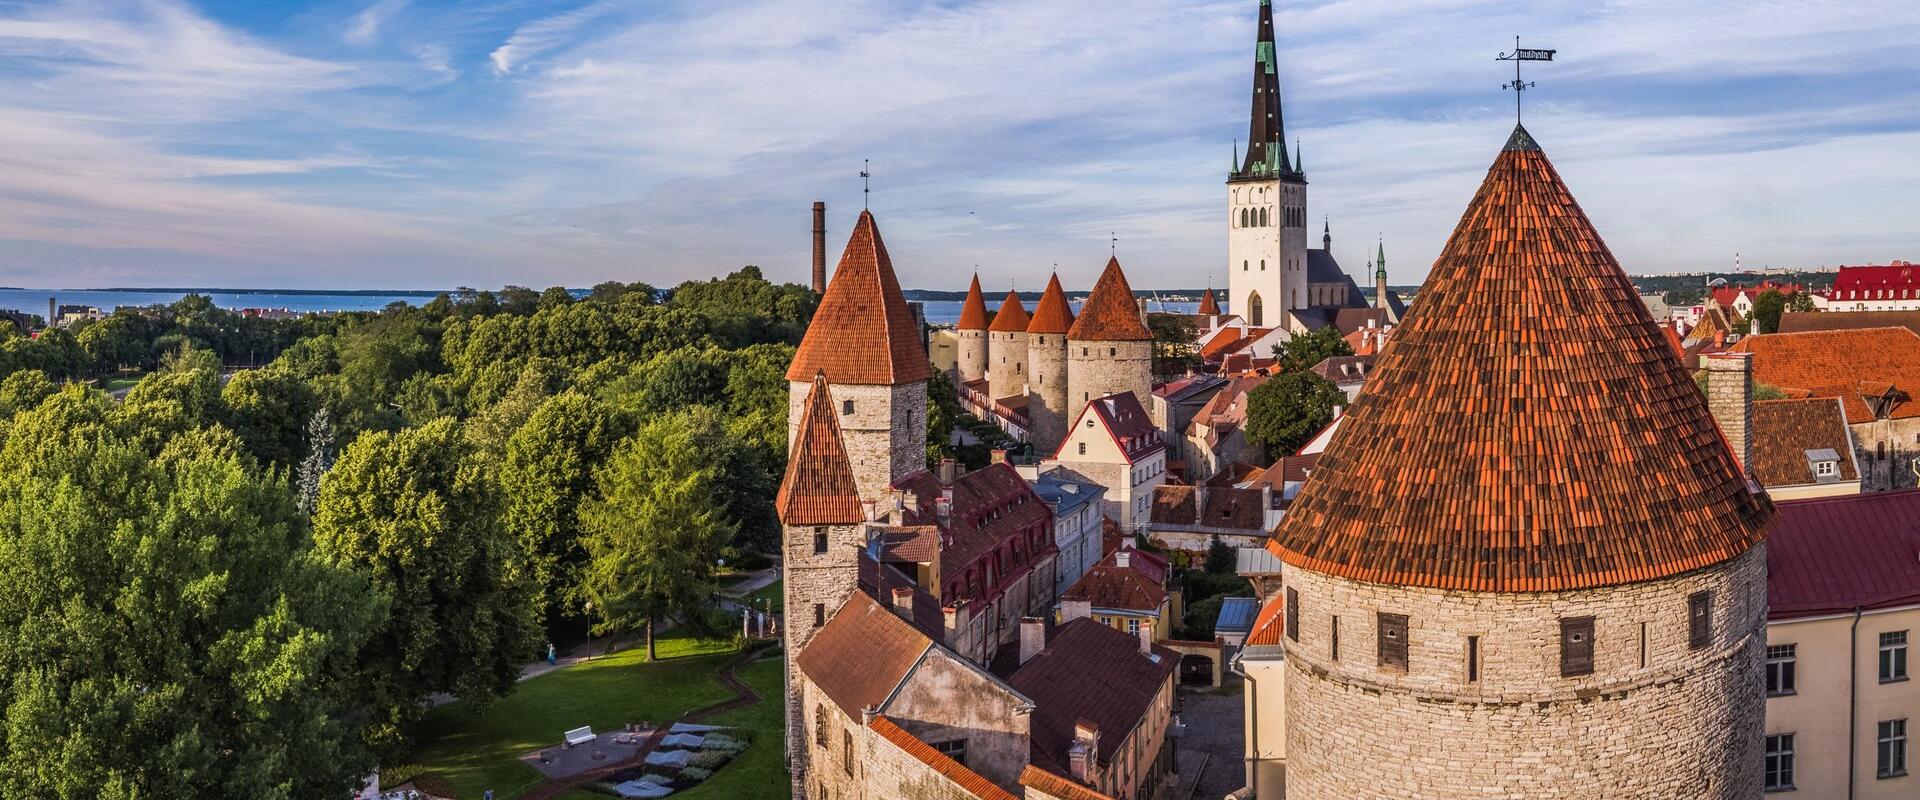 View of the Tallinn city wall and the Towers Square